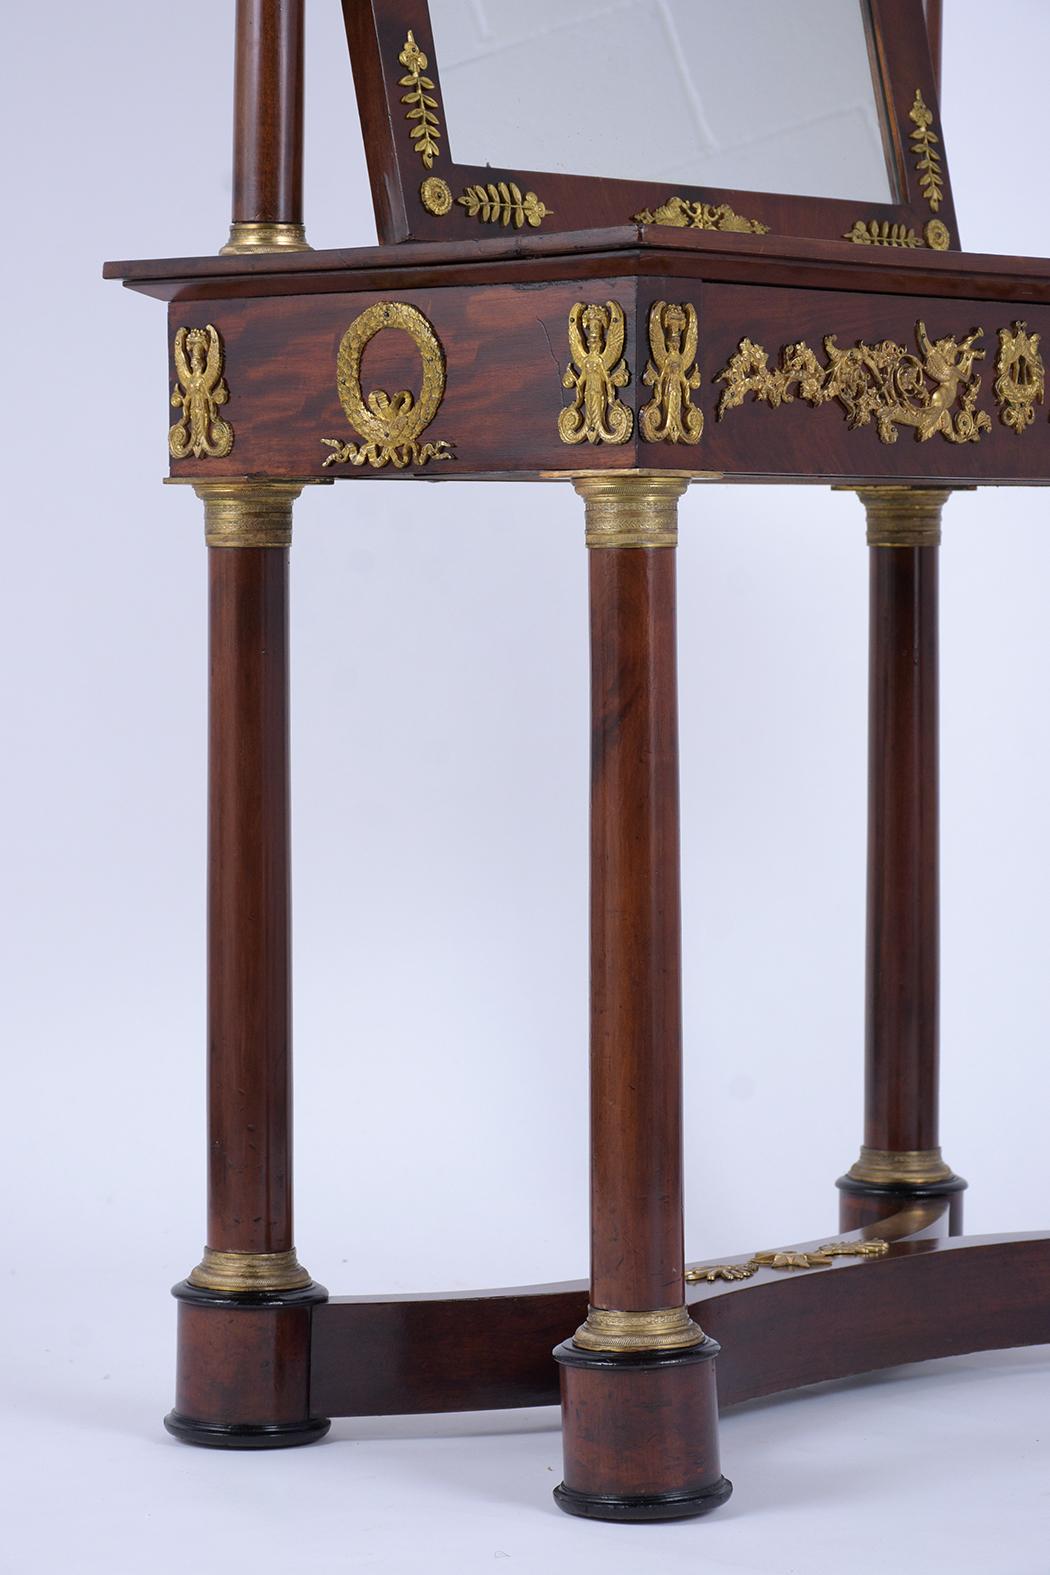 Wood 1840s French Empire Mahogany Vanity Table with Arched Mirror & Bronze Accents For Sale